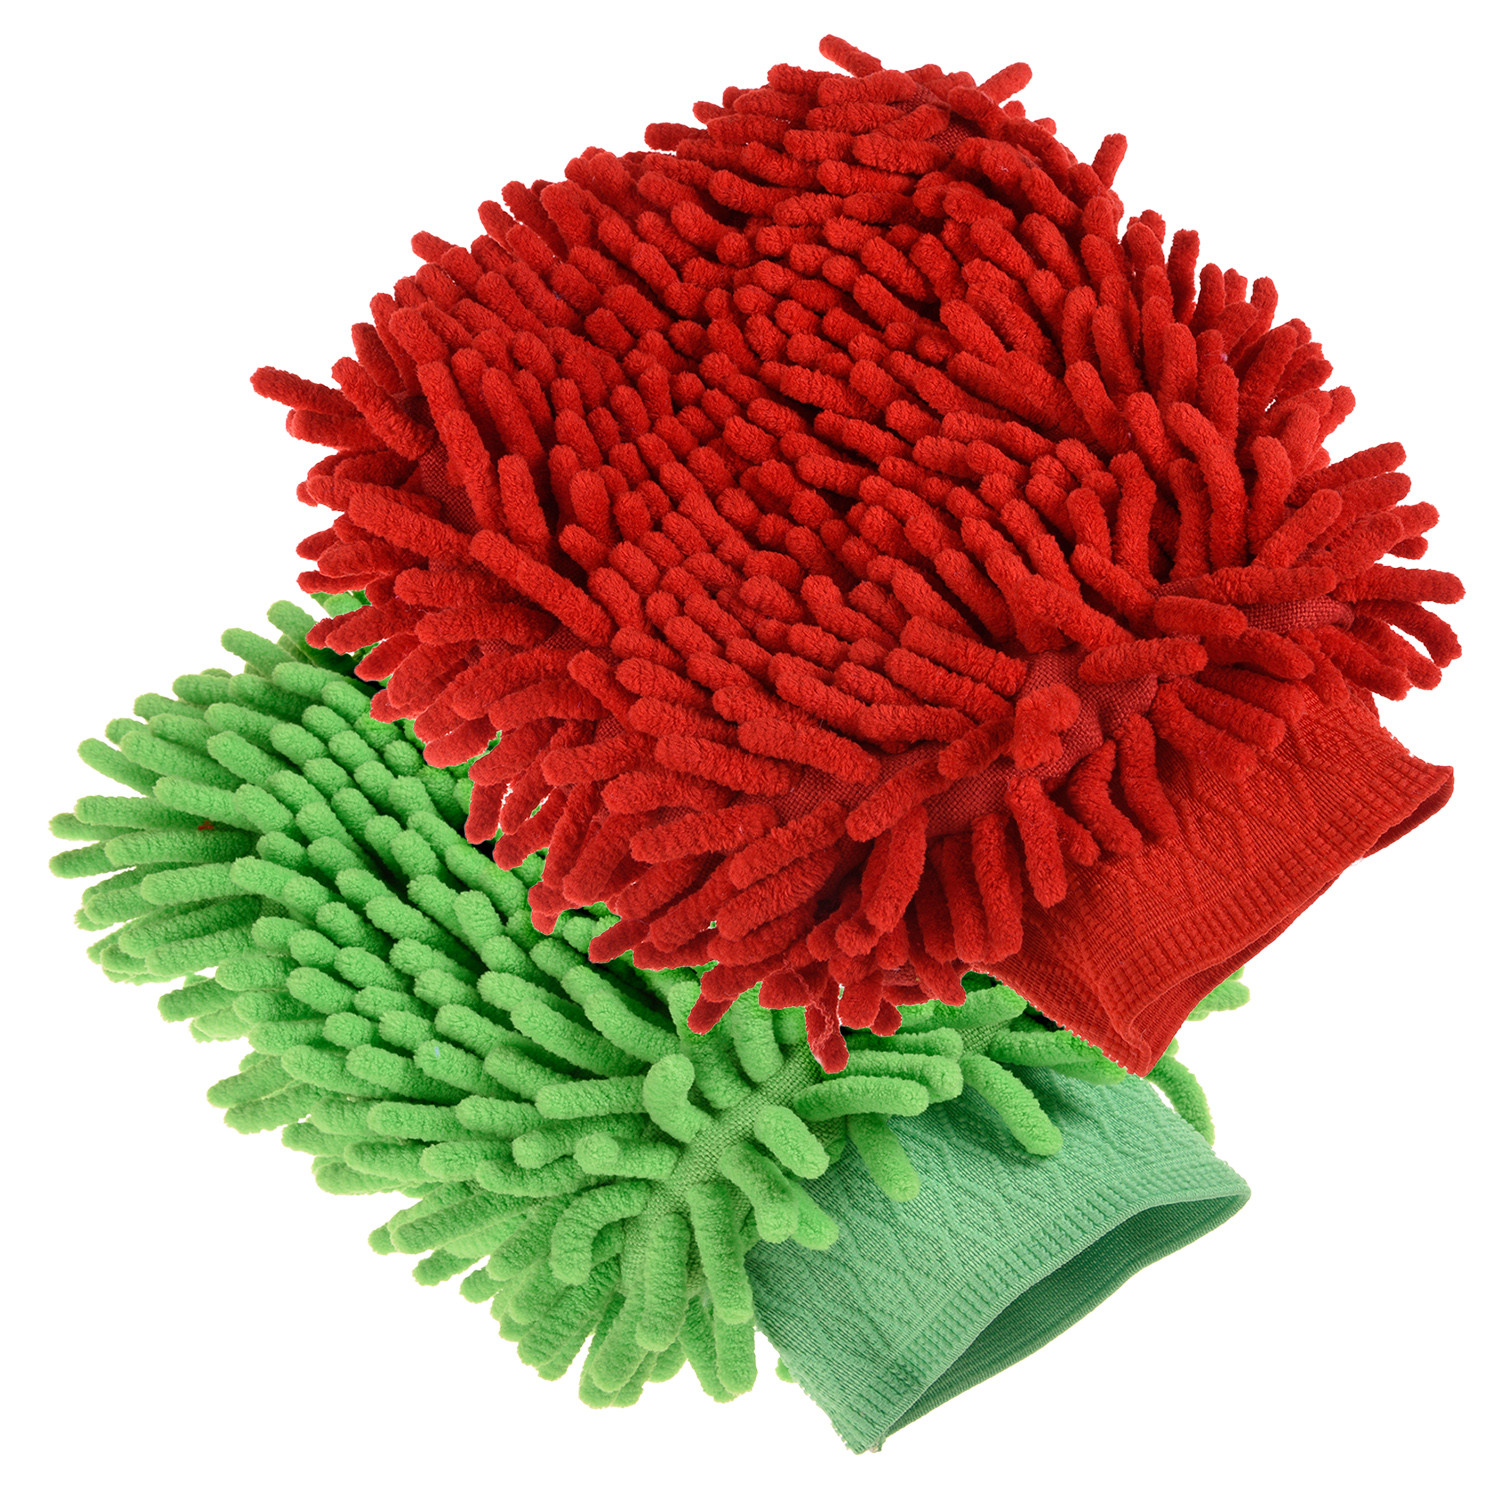 Kuber Industries Chenille Mitts|Microfiber Cleaning Gloves|Inside Waterproof Cloth Gloves|100 Gram Weighted Hand Duster|Chenille Gloves For Car|Glass|Pack of 2 (Red & Green)